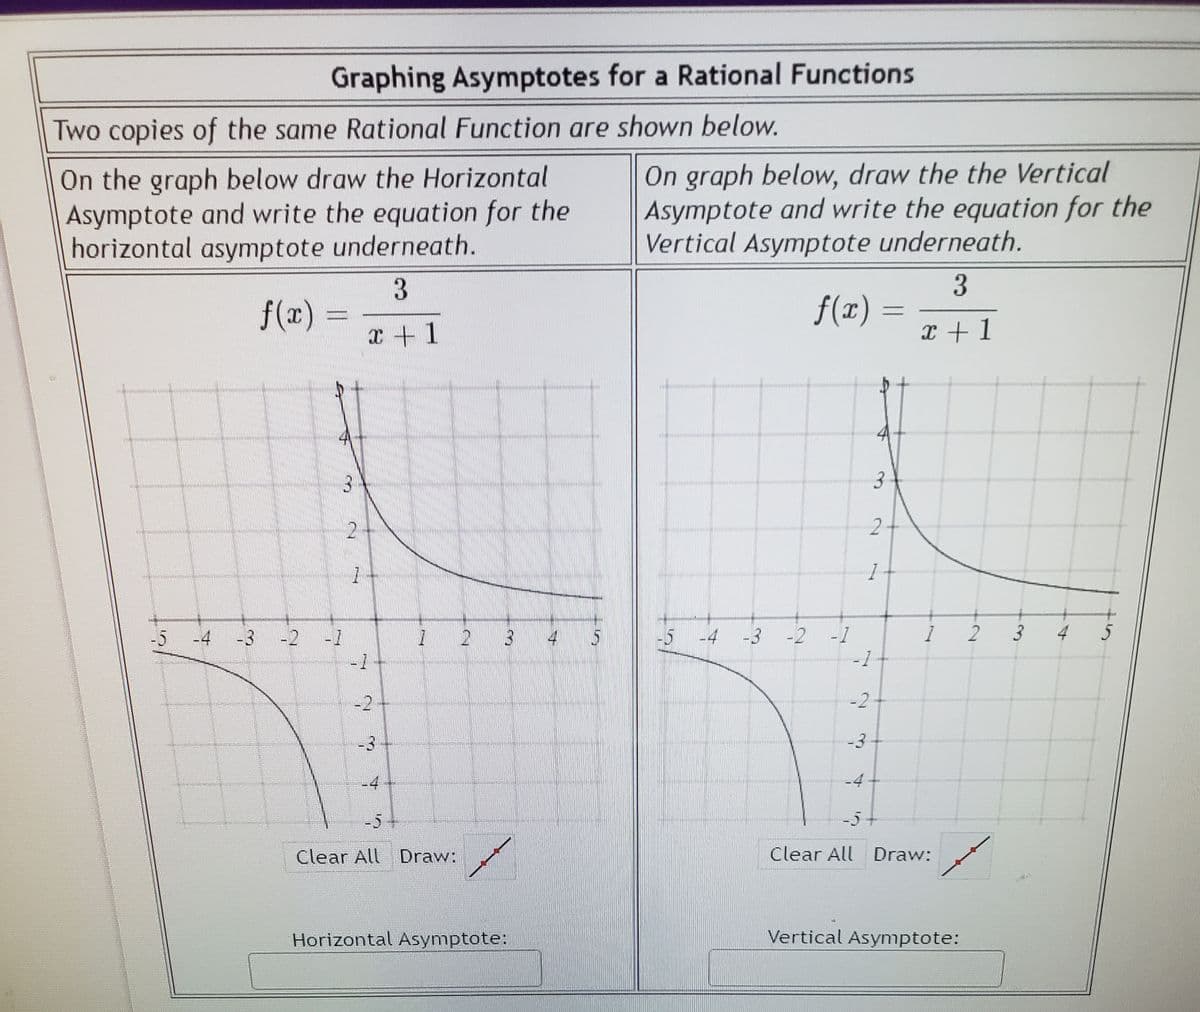 Graphing Asymptotes for a Rational Functions
Two copies of the same Rational Function are shown below.
On the graph below draw the Horizontal
Asymptote and write the equation for the
horizontal asymptote underneath.
On graph below, draw the the Vertical
Asymptote and write the equation for the
Vertical Asymptote underneath.
f(x)
f(x)
x + 1
x +1
3
2-
1
-5
-4
3 -2 -1
2 3
5 -4 -3 -2
-1
2
3 4
-1
-2
-2
-3
-3
-4
-4
-5
-5
Clear All Draw:
Clear All Draw:
Horizontal Asymptote:
Vertical Asymptote:
3.
